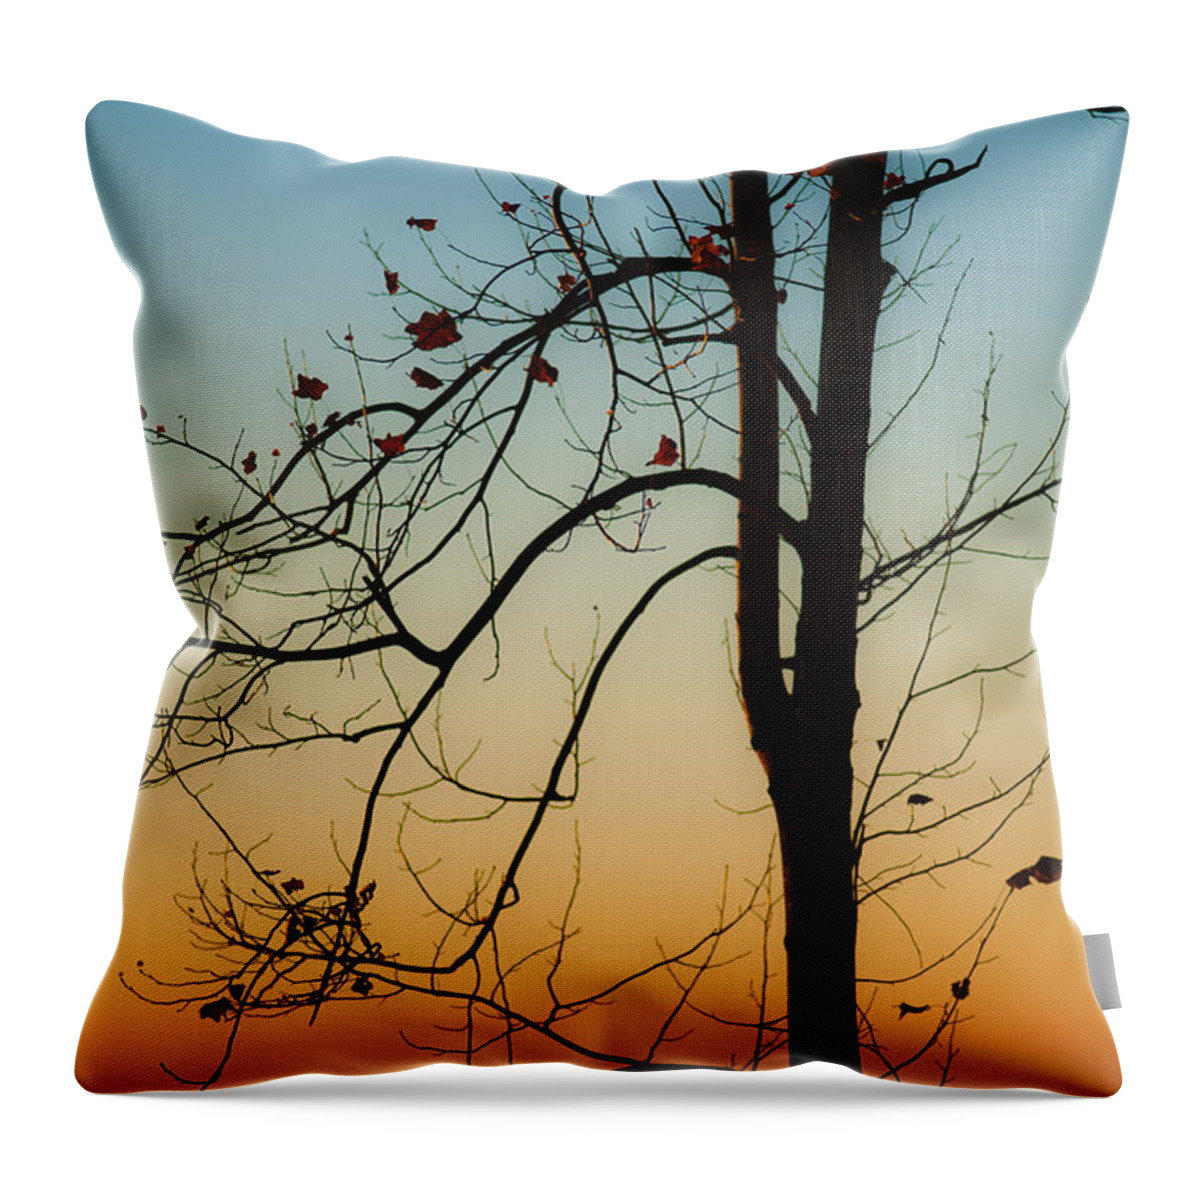 Landscape Throw Pillow featuring the photograph To The Morning by Joye Ardyn Durham